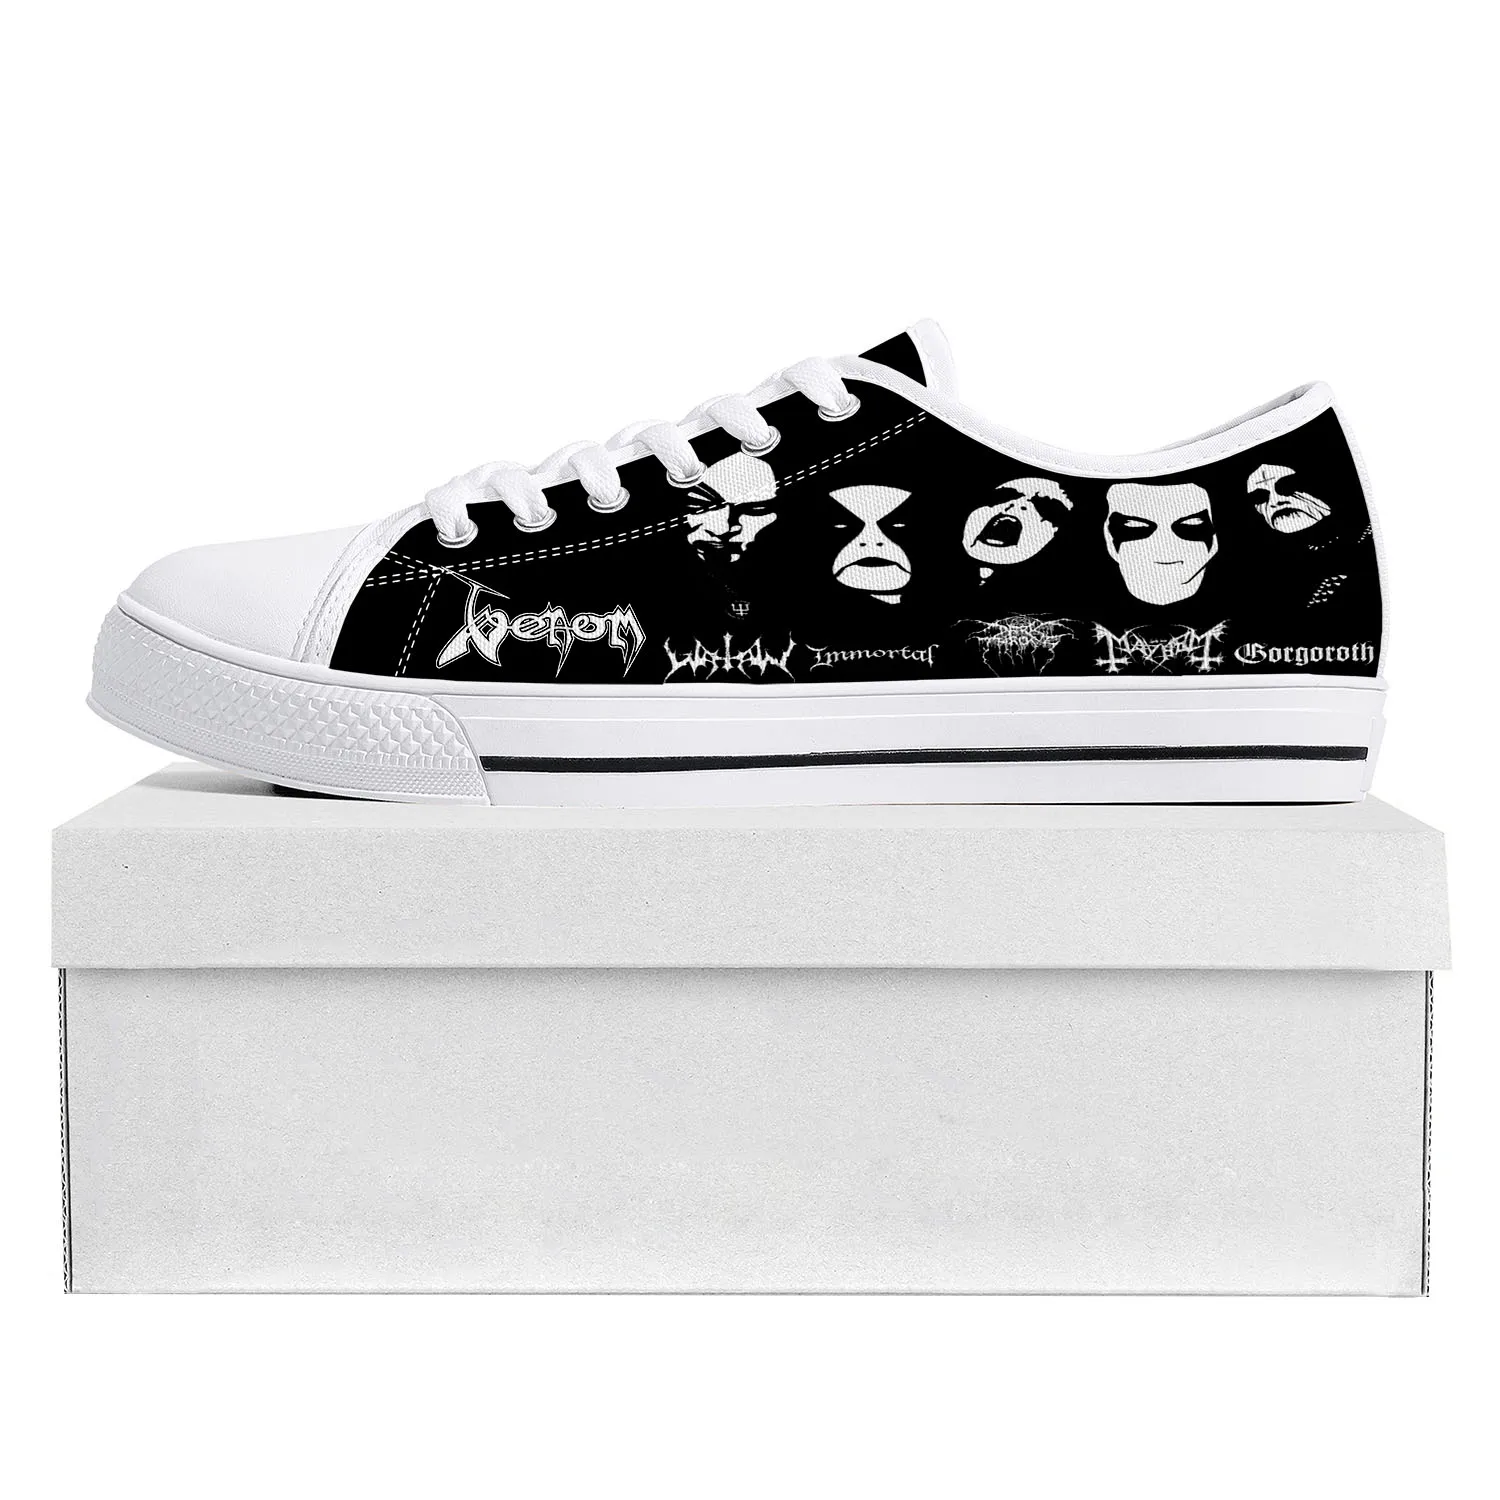 

Venom Band Low Top Sneakers Mens Womens Teenager Canvas High Quality Sneaker Welcome To Hell Custom Made Shoes Customize Shoe